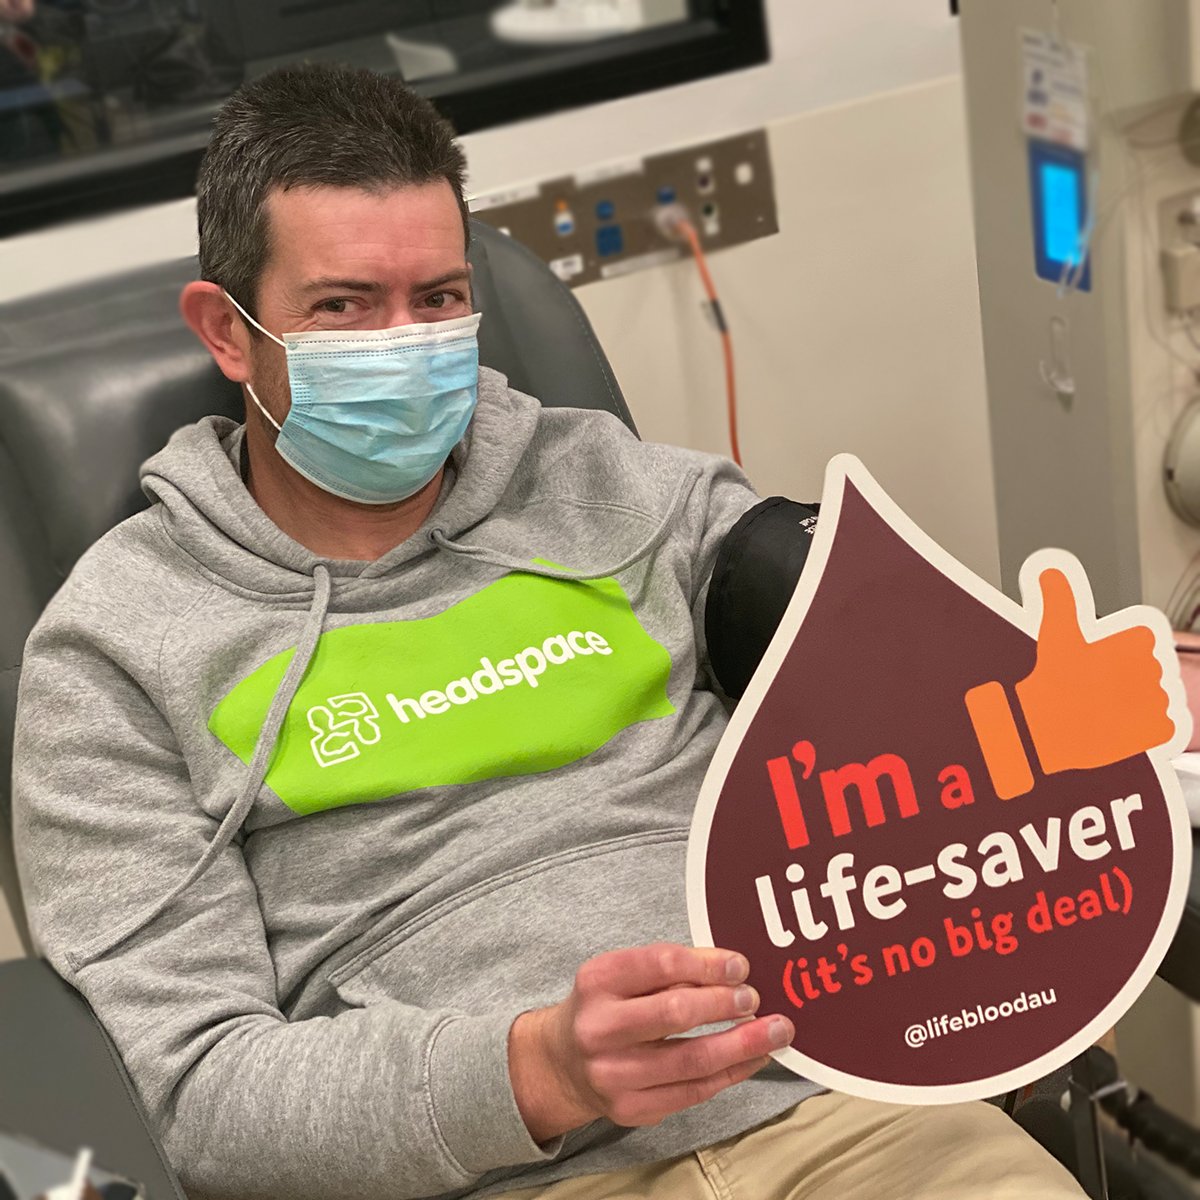 Donating blood is a great way to get in that all-important ‘me time’ which we tend to miss out on when life gets in the way. The @headspace_aus Lifeblood Team know this well, making an impact on close to 240 lives. Find out more about joining a Team at donateblood.page.link/hCs1